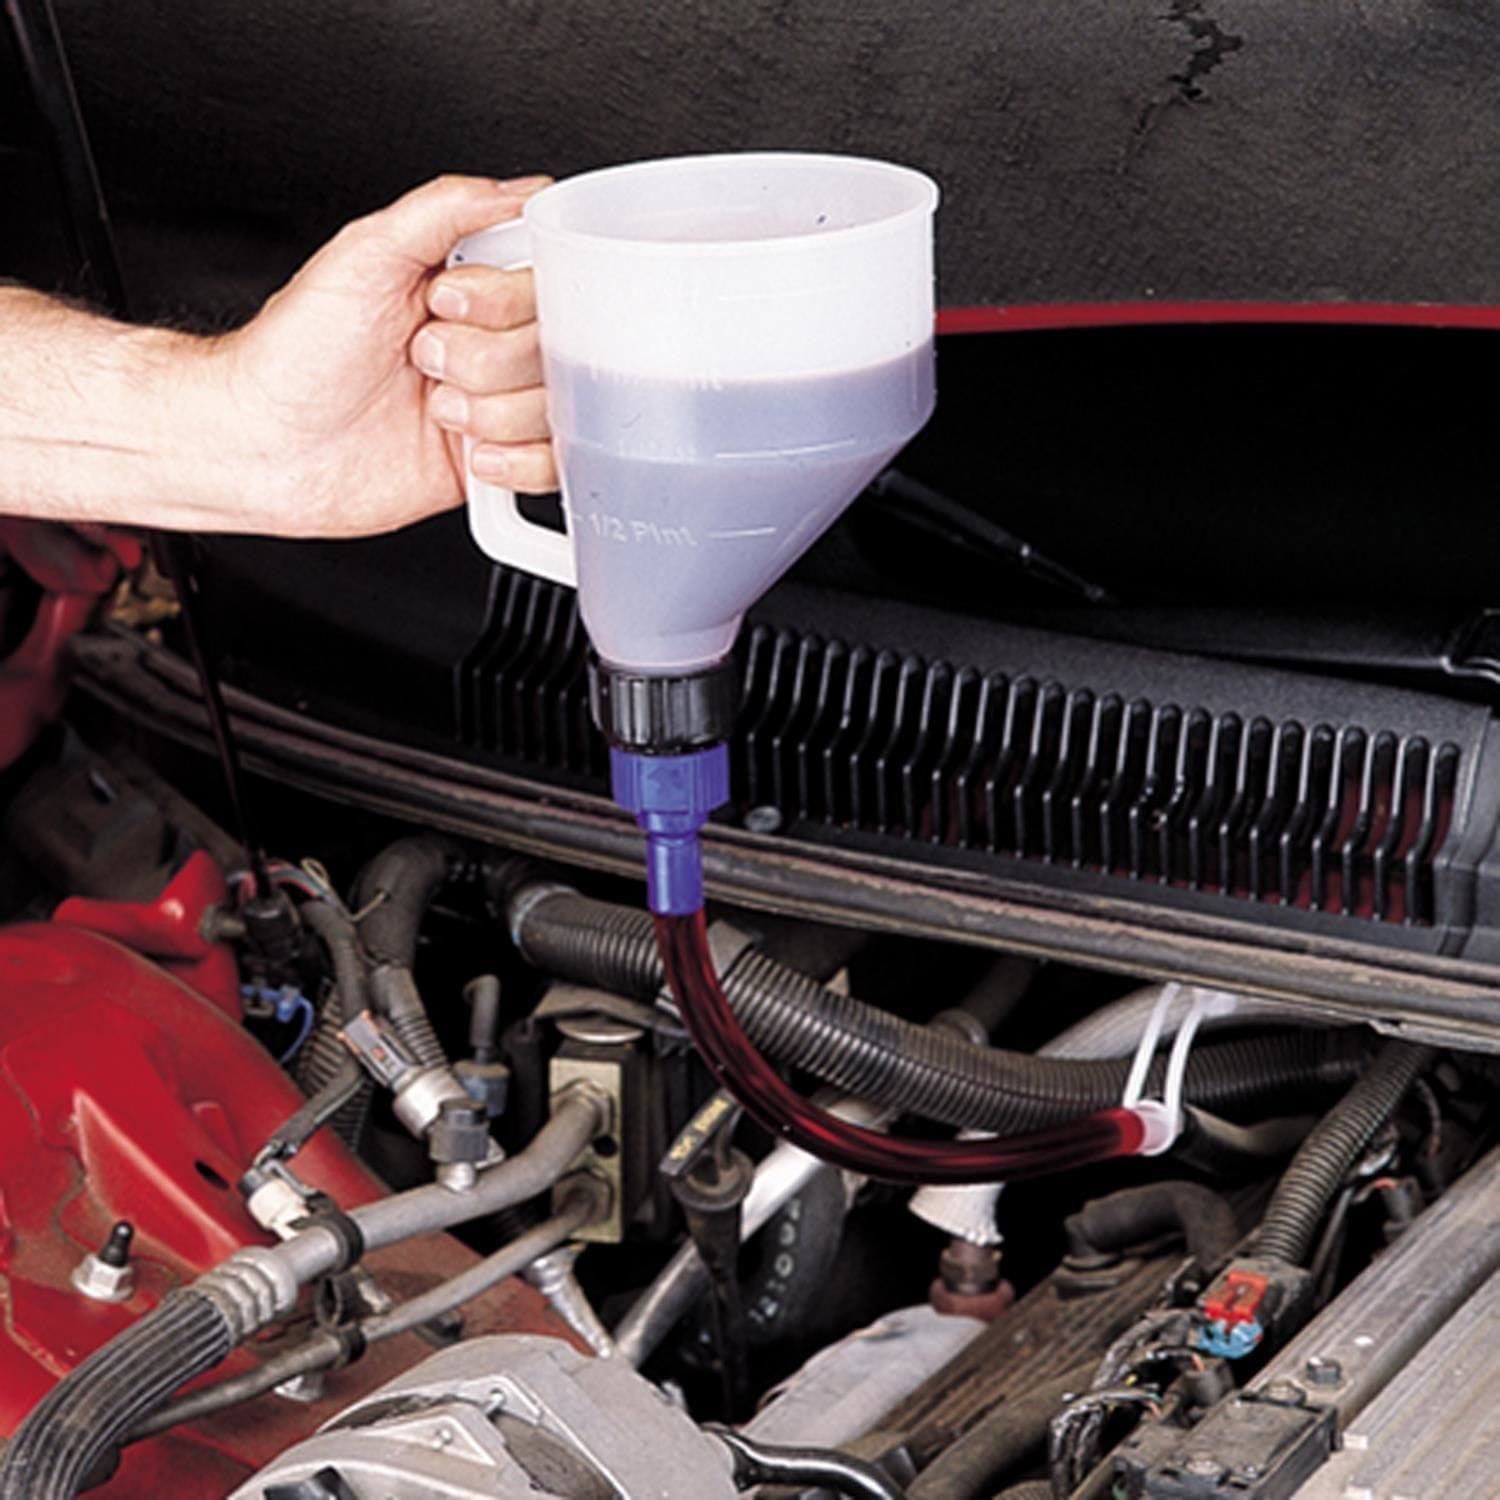 a long tube rather than a funnel to add windshield washer fluid?